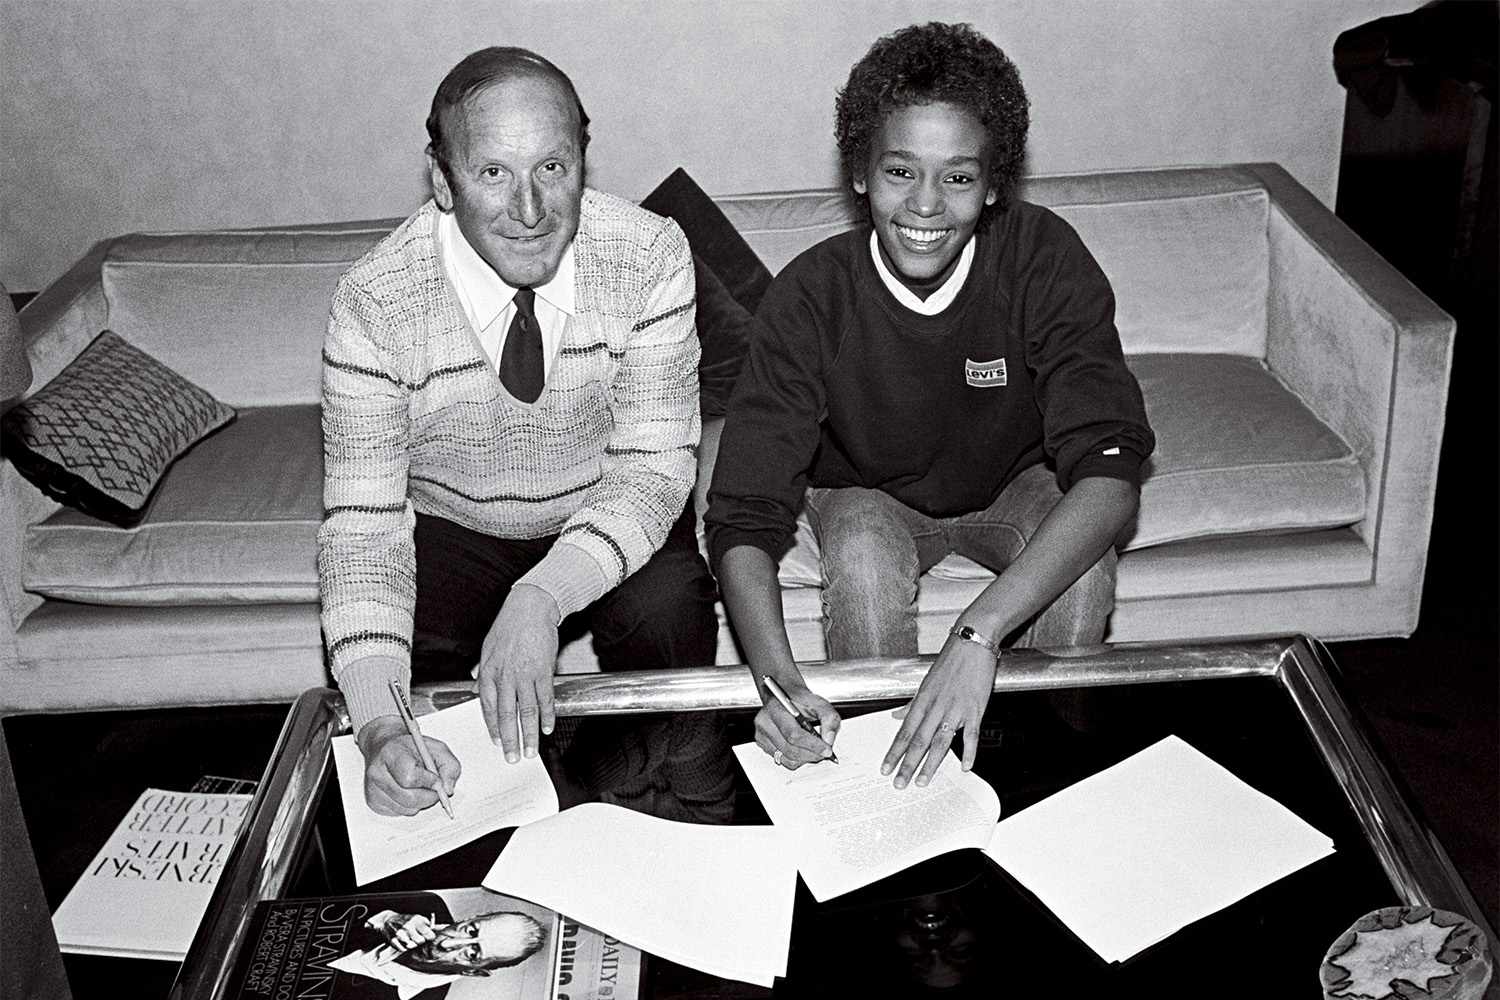 Clive Davis and Whitney Houston photographed at the signing of her contract with Arista Records at the Arista Studio in New York City on April 10, 1983. howard grimes of the hi rhythm section performing at the seventh annual ponderosa stomp at the house of blues held in new orleans, la on april 29, 2008. whitney houston Getty Images